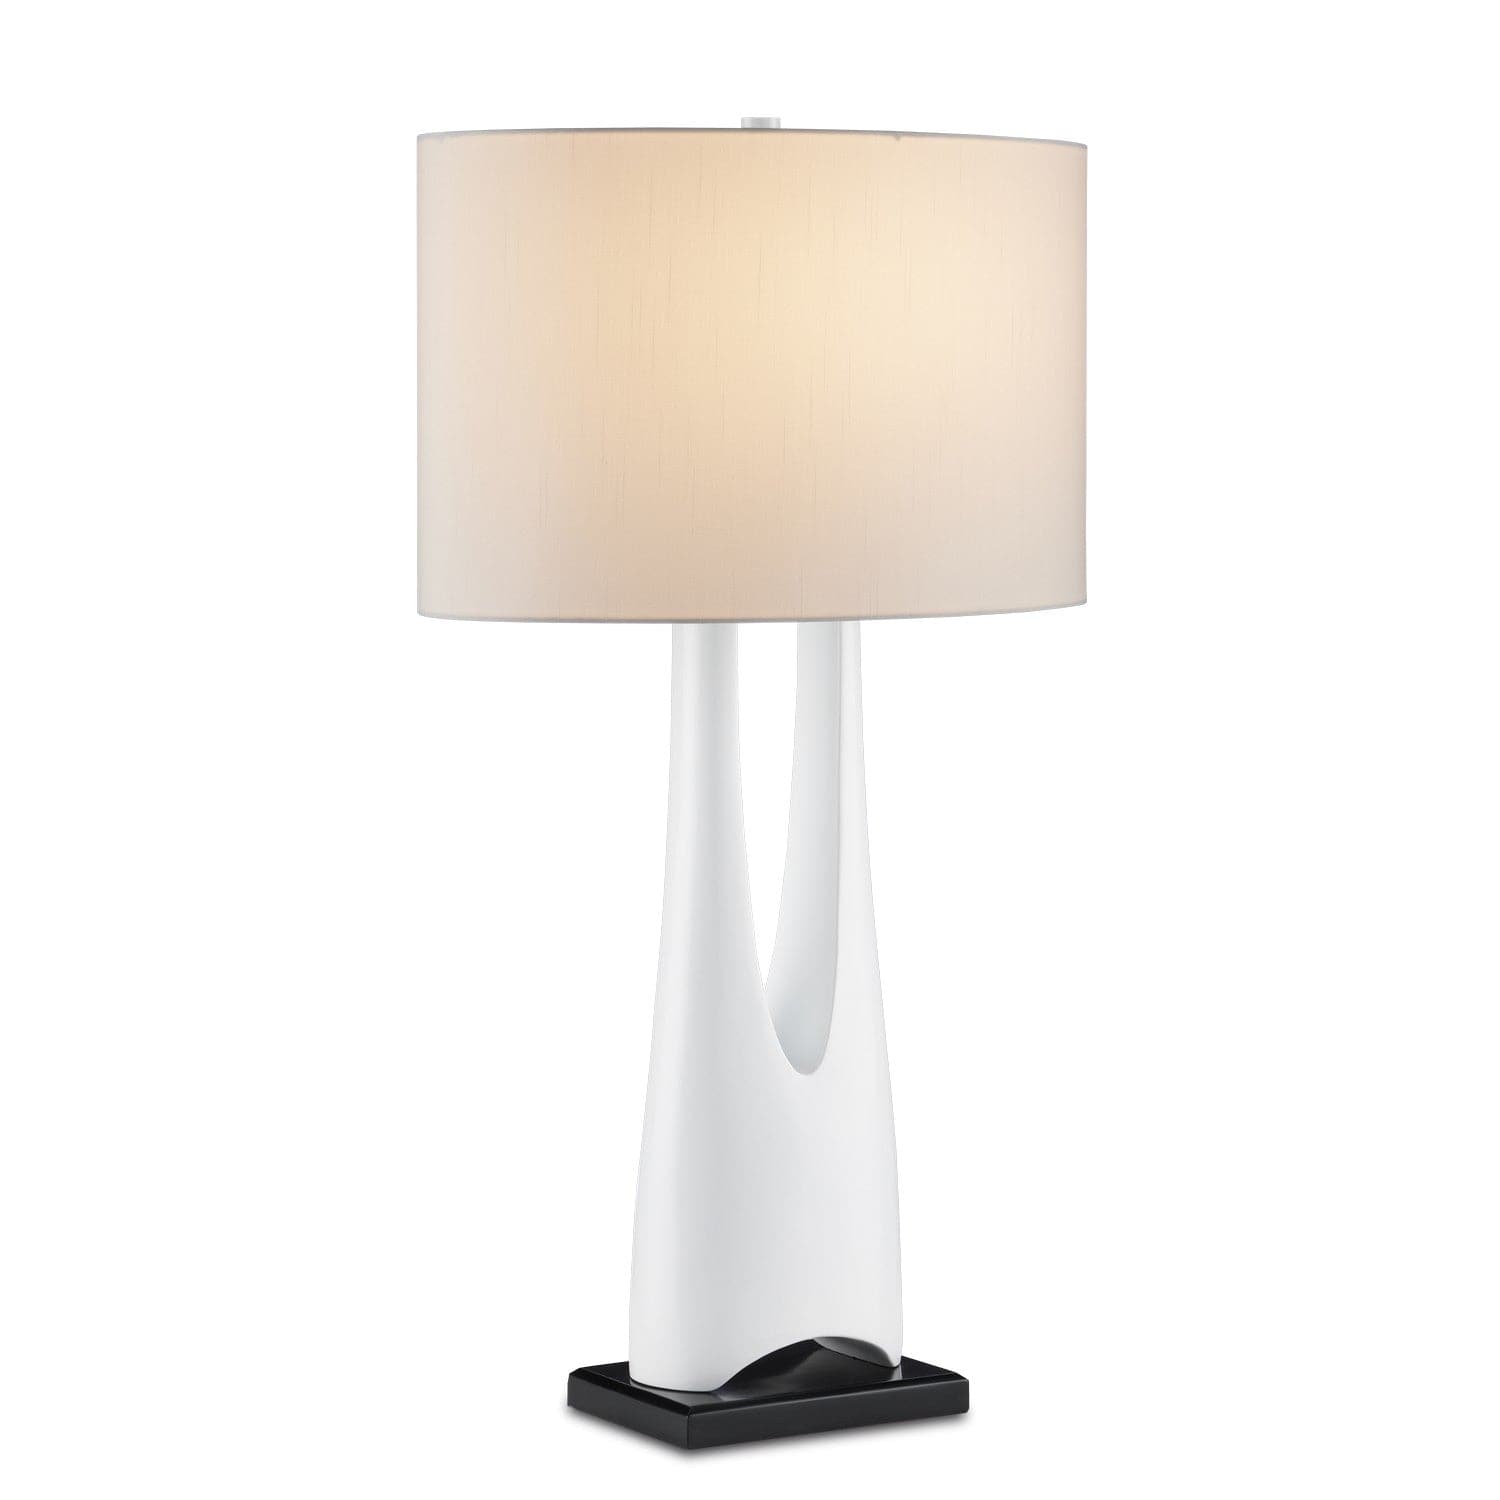 Currey and Company - 6000-0853 - One Light Table Lamp - Glossy White/Black